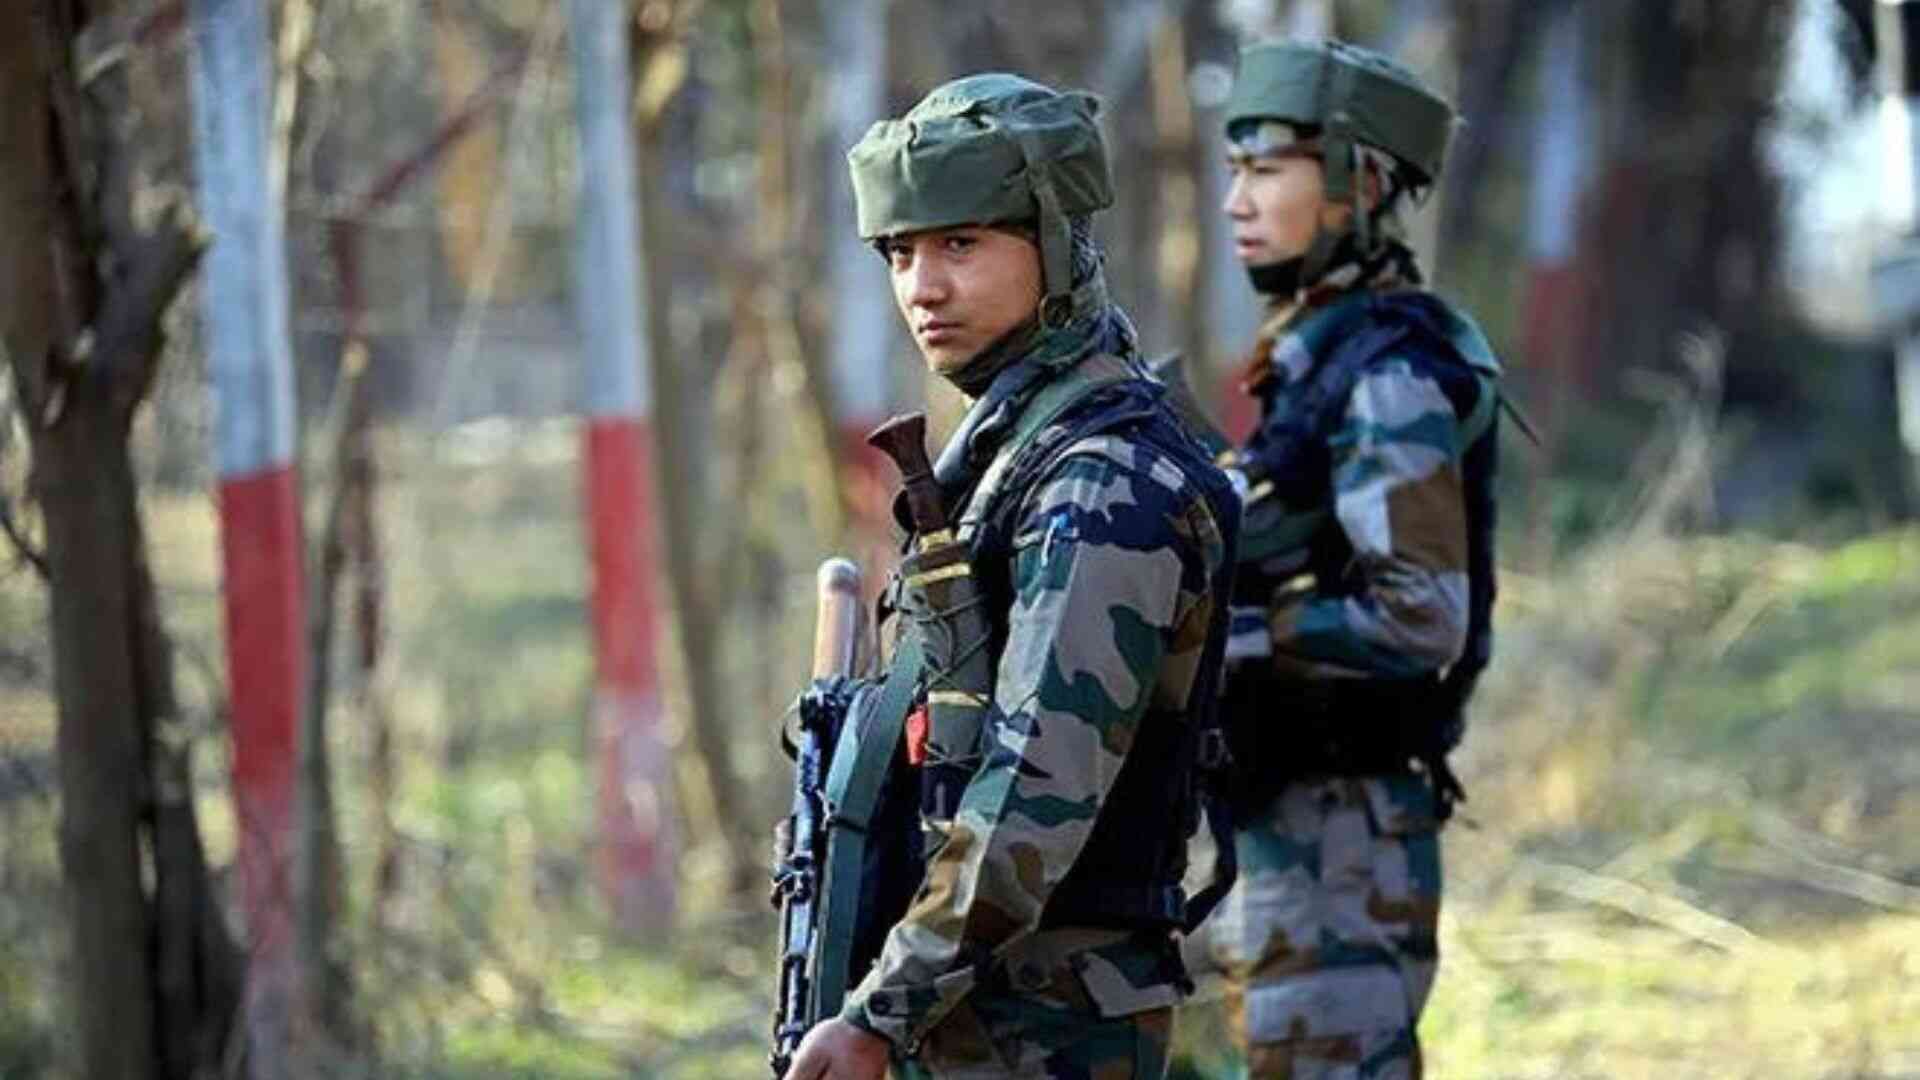 J&K: Indian Army Thwarts Infiltration Attempt In Kupwara, Ongoing Operation